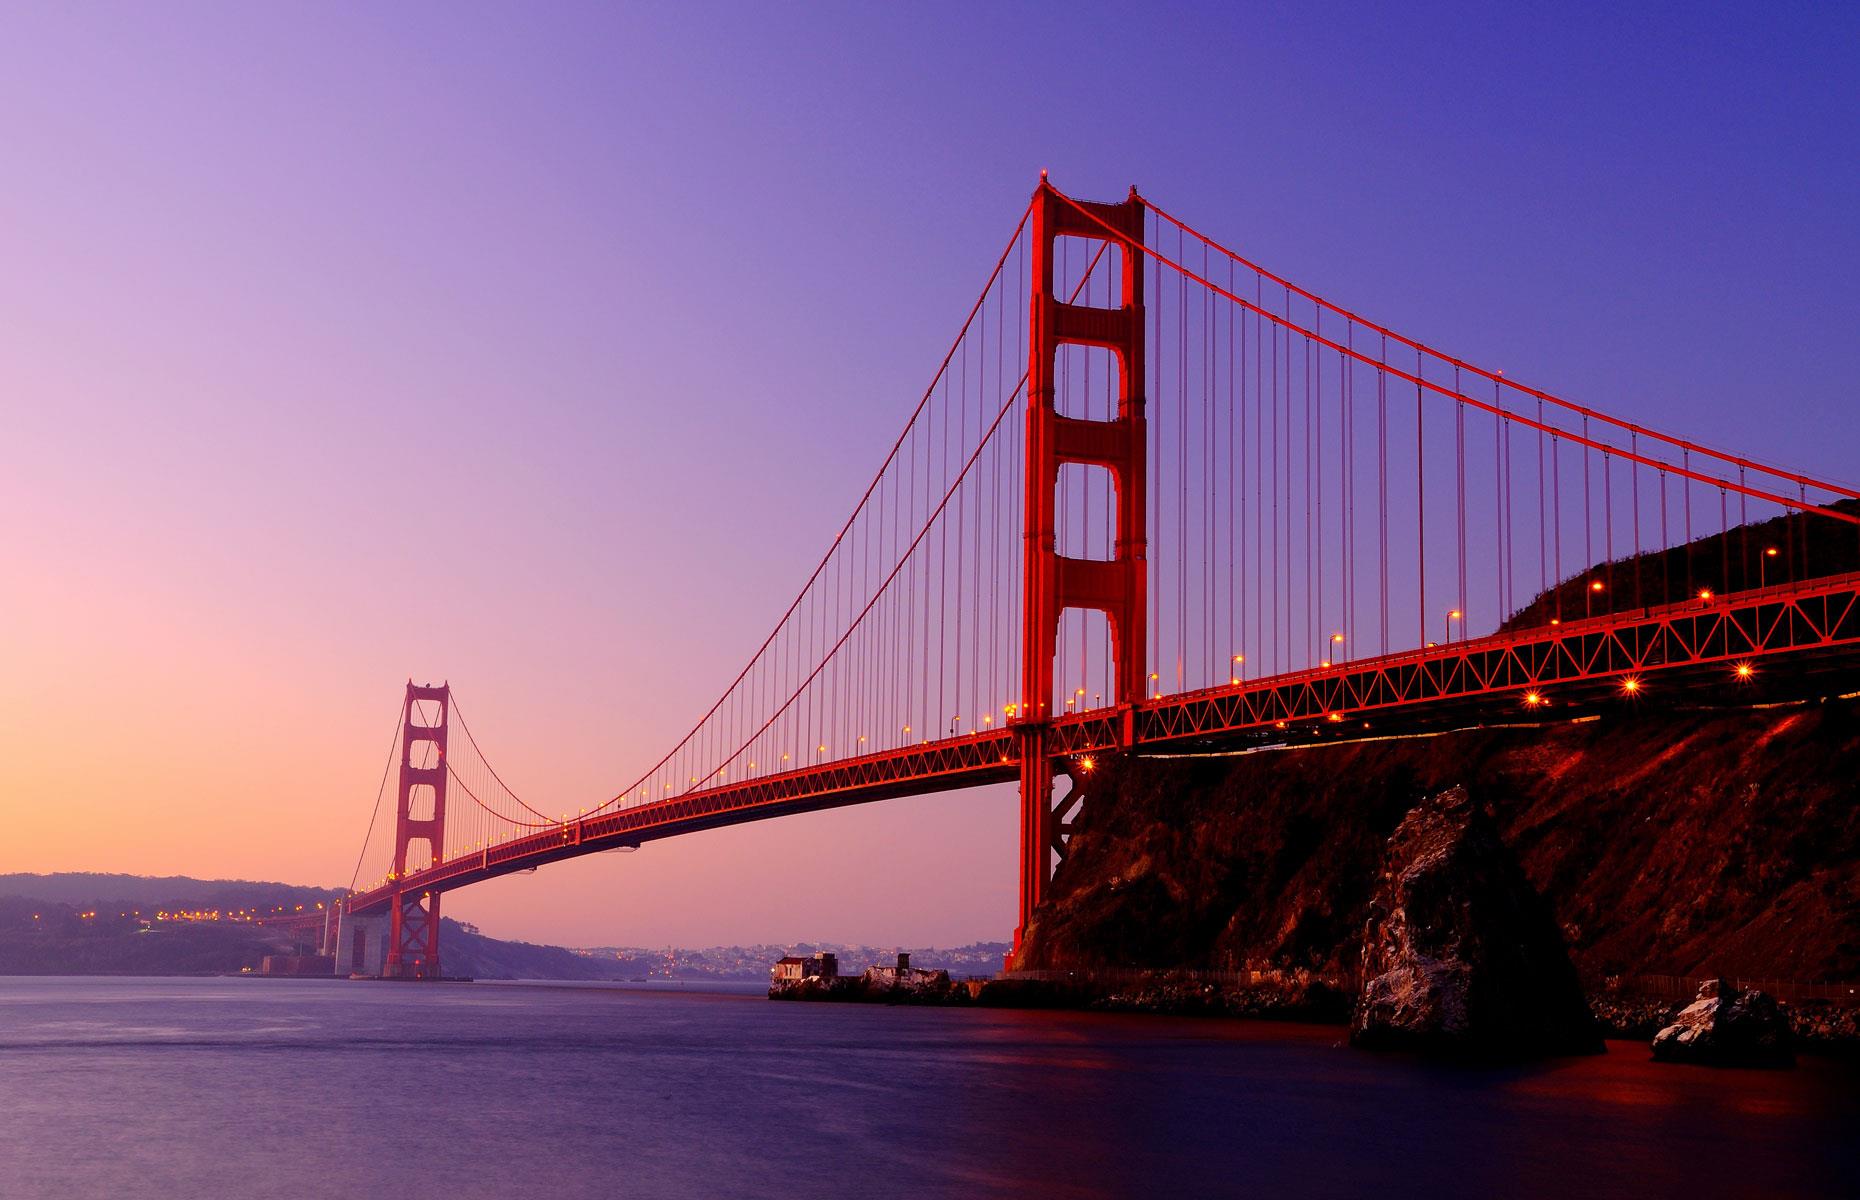 One of the most famous and beautiful suspension bridges on the planet, San Francisco's glorious Golden Gate Bridge opened to traffic in 1934. The 1.7 mile-long crossing, which has been declared a Wonder of the Modern World, was designed by engineer Joseph Strauss.